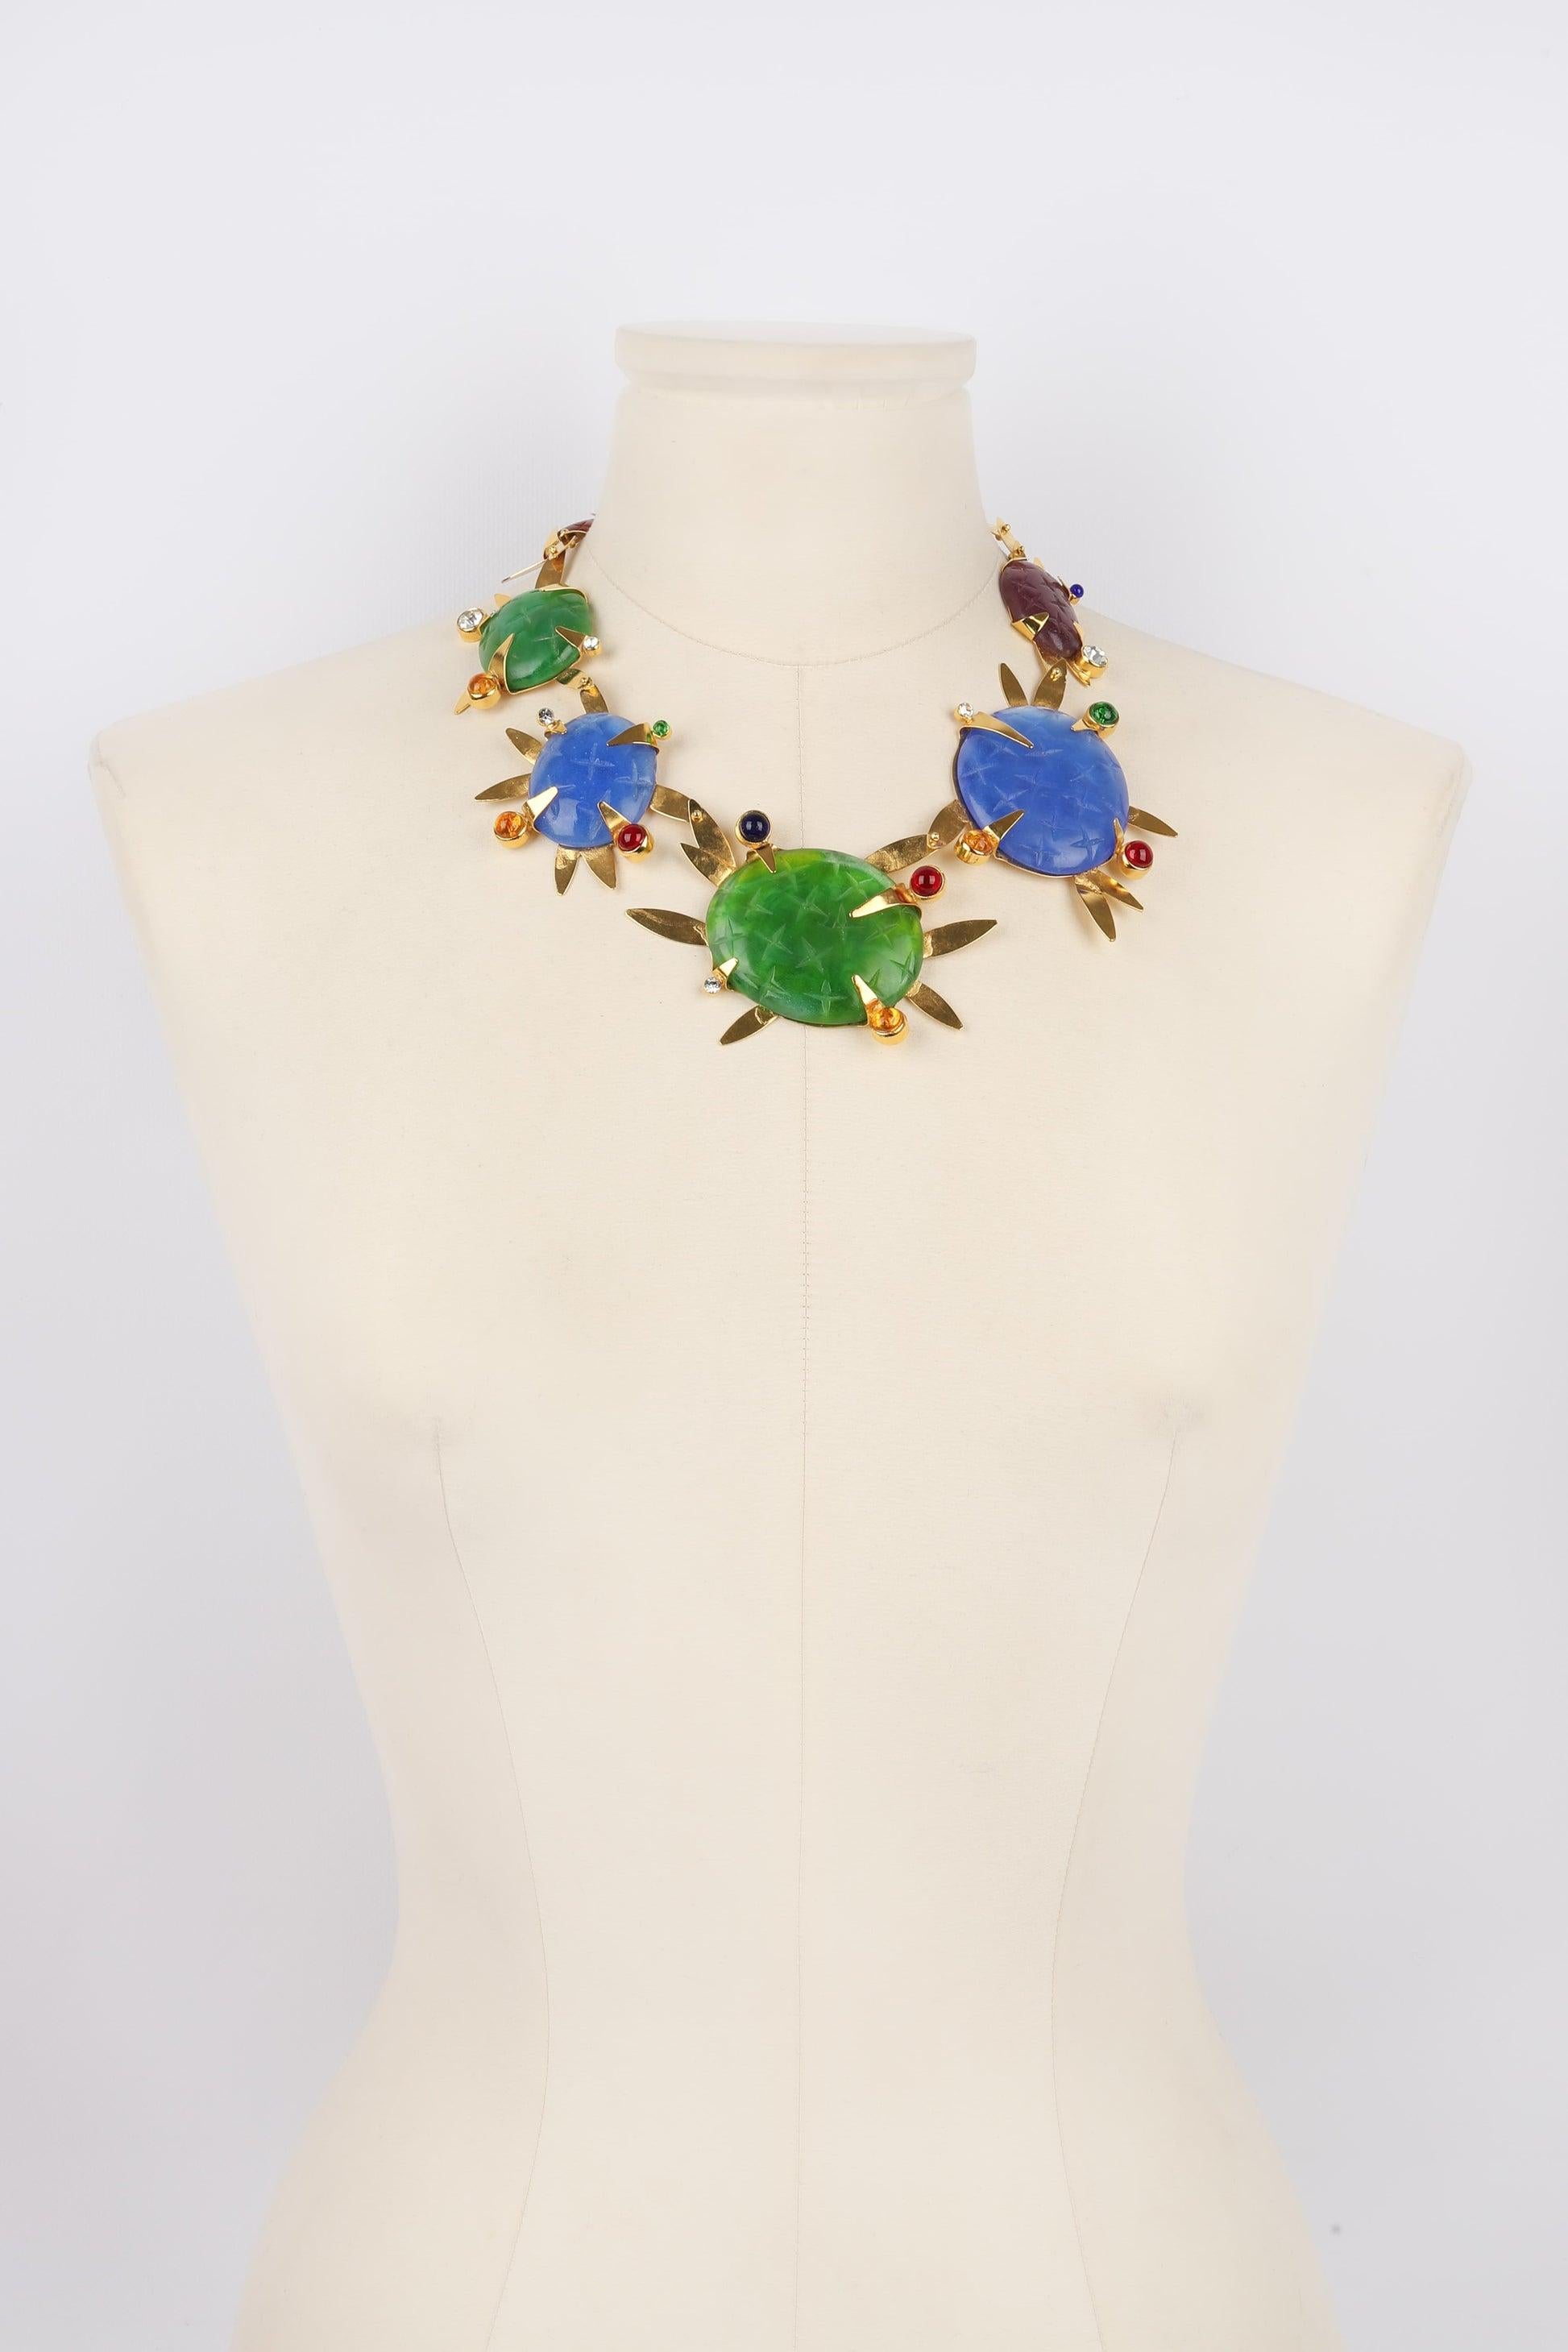 Daum - (Made in France) Golden metal articulated necklace with resin, glass paste, and rhinestone cabochons. Jewelry from the middle of the 1990s.

Additional information:
Condition: Very good condition
Dimensions: Length: 46 cm
Period: 20th